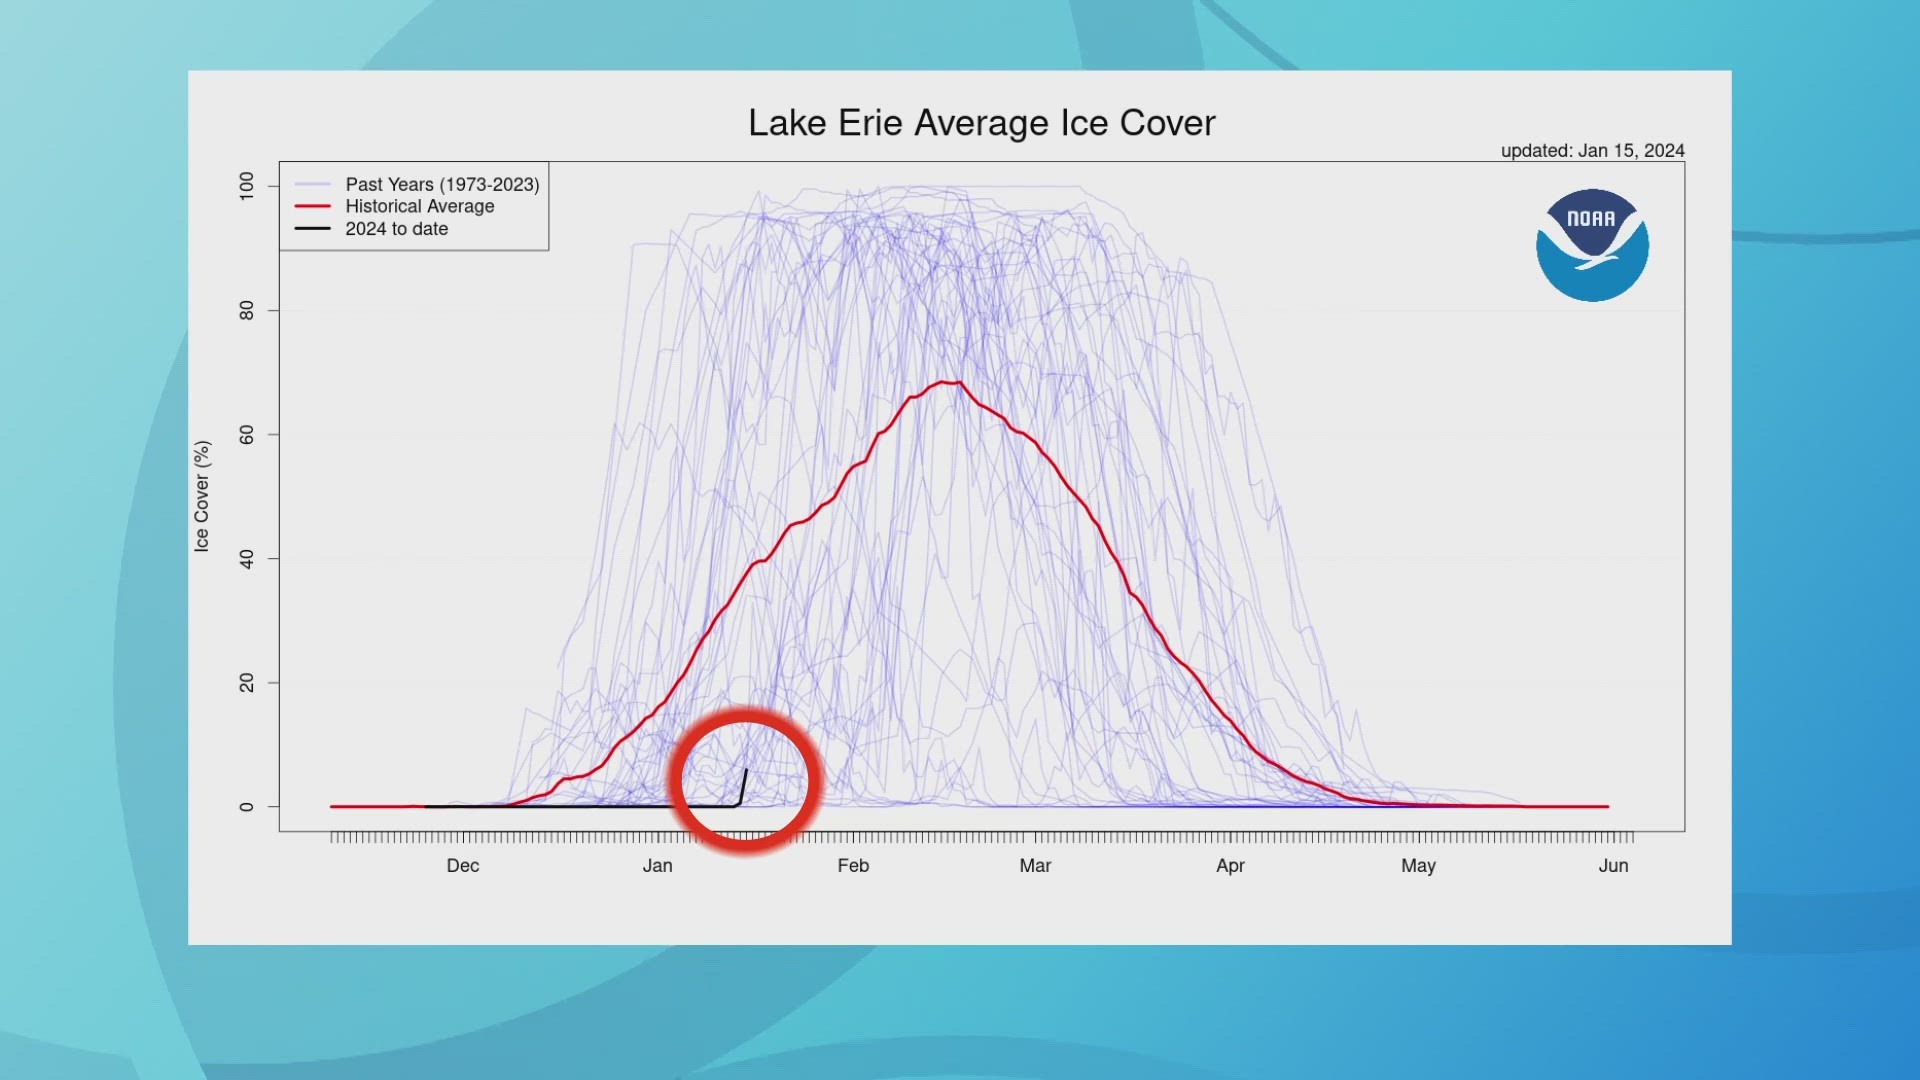 The NOAA Great Lakes Environmental Research Laboratory says the latest cold snap has increased the amount of ice on Lake Erie.